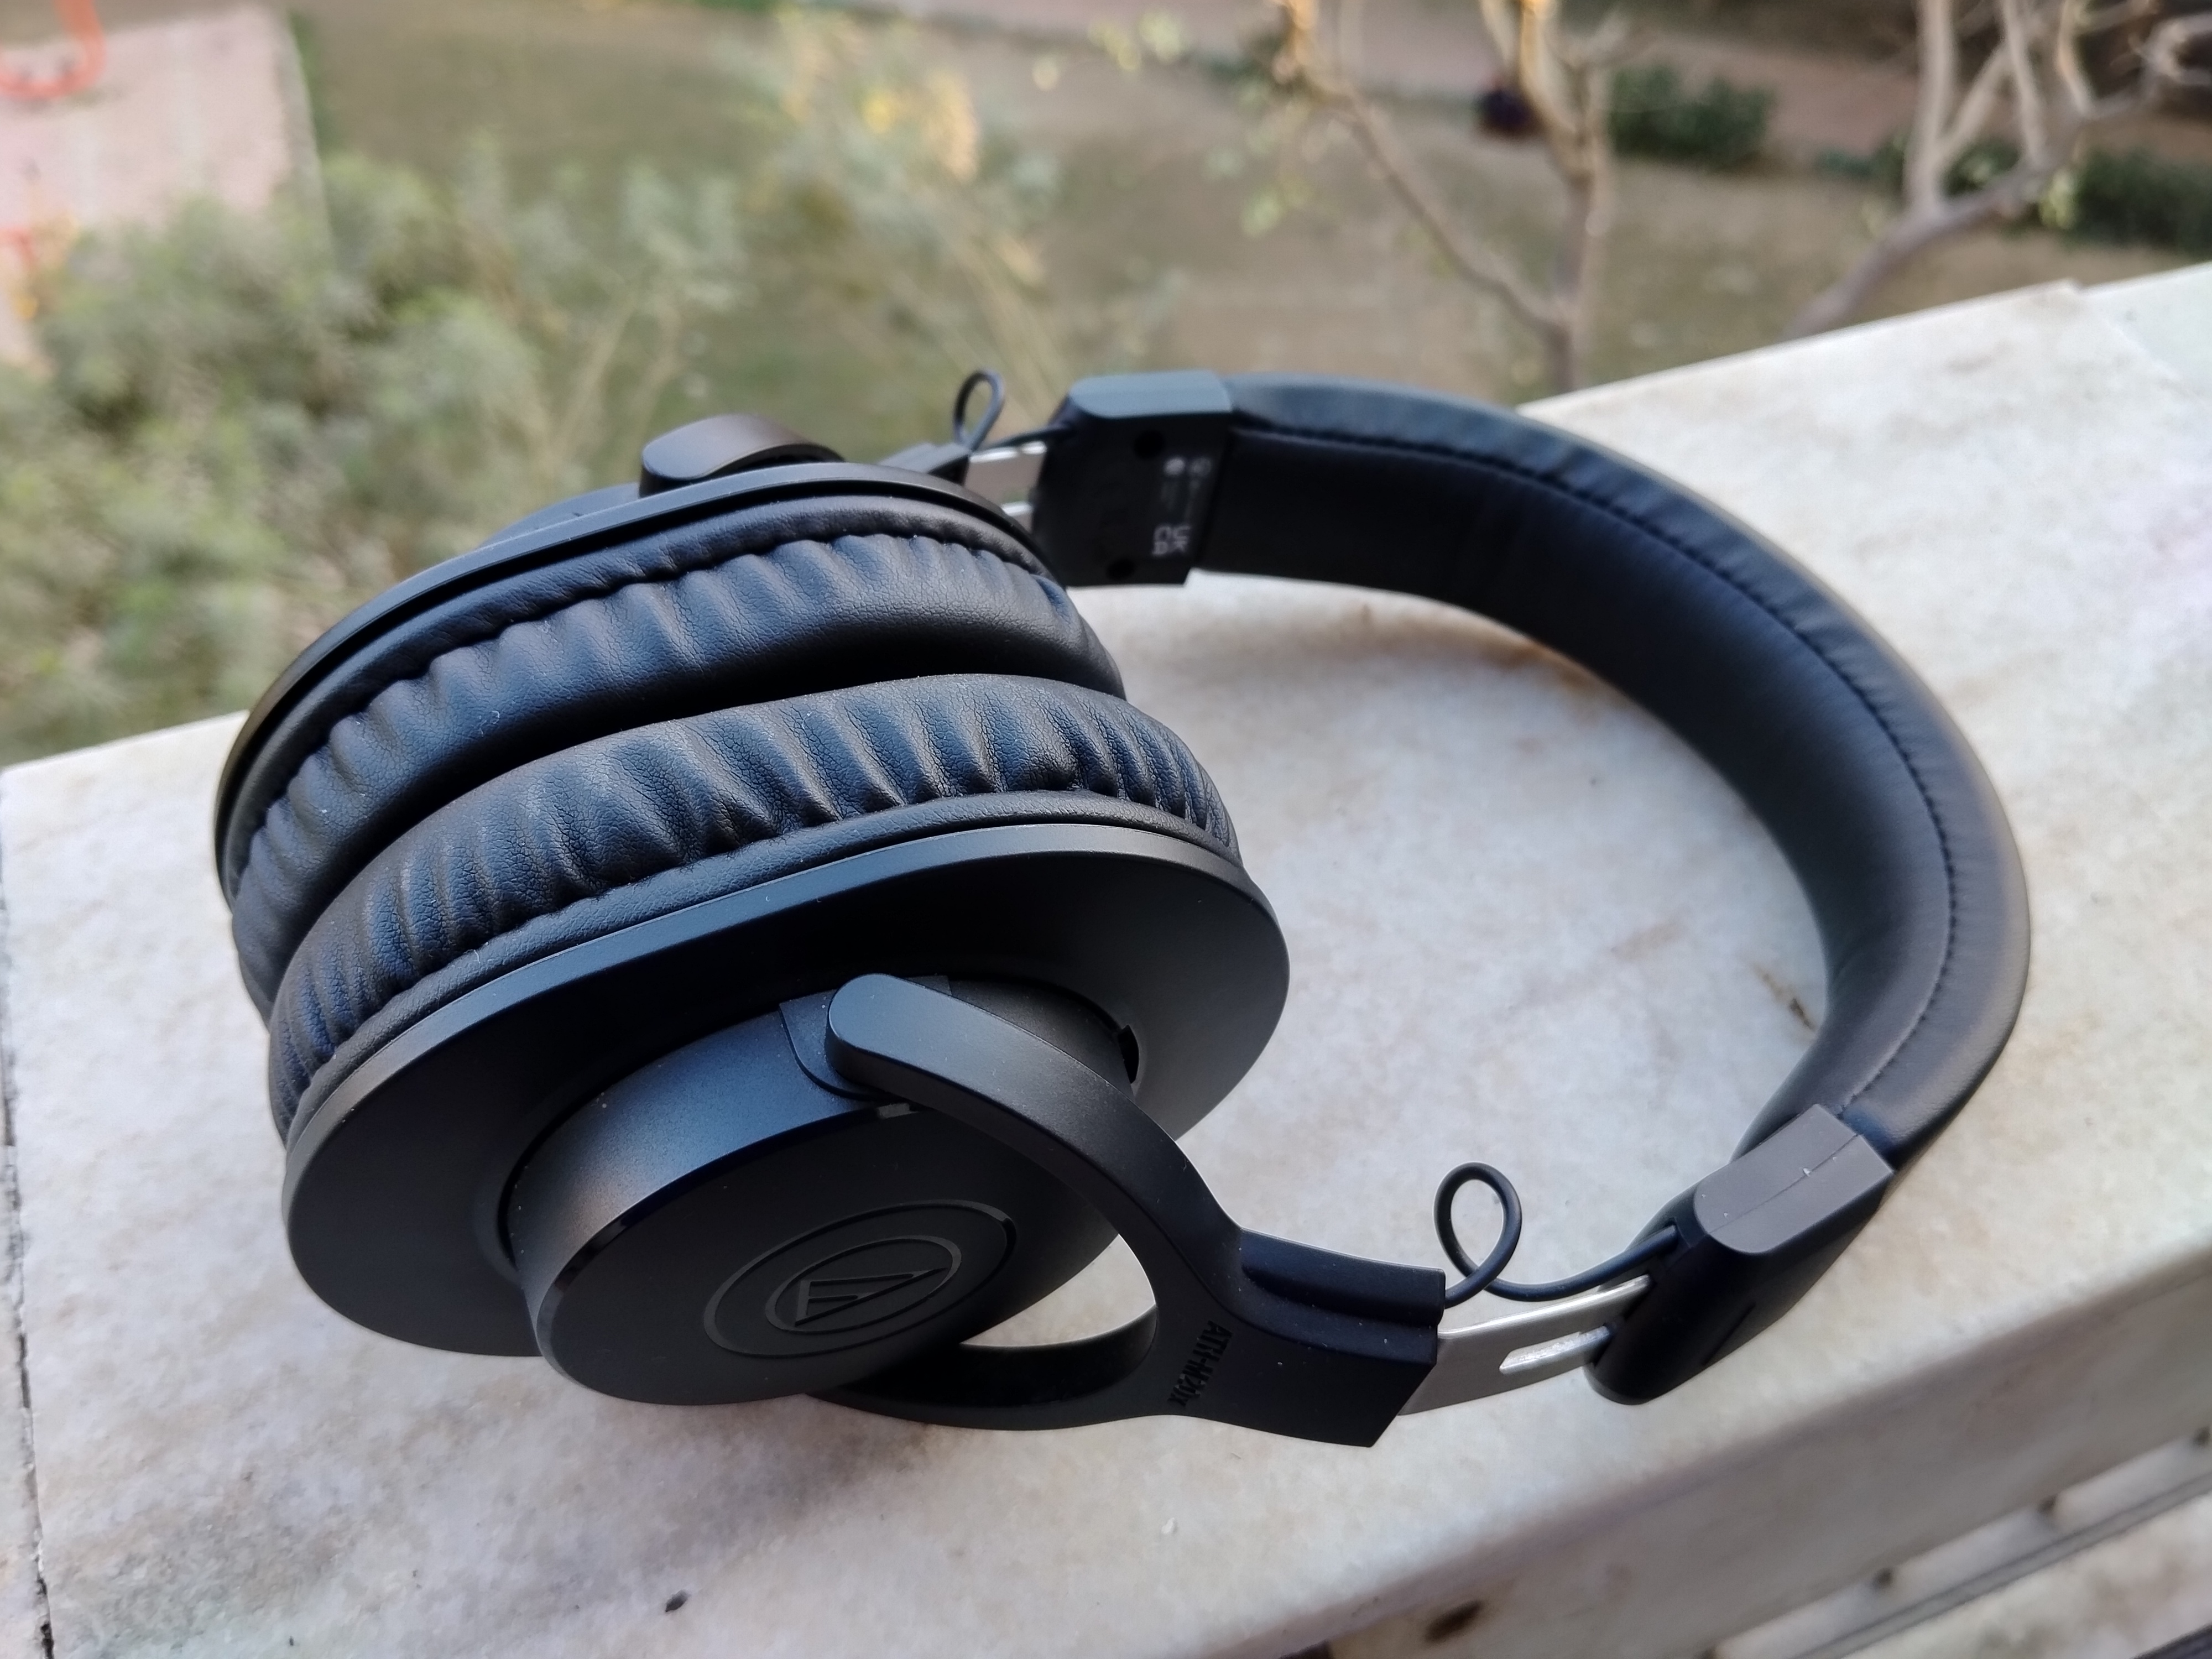 Audio-Technica ATH-M20xBT: Affordable over-ear headphone - The Week